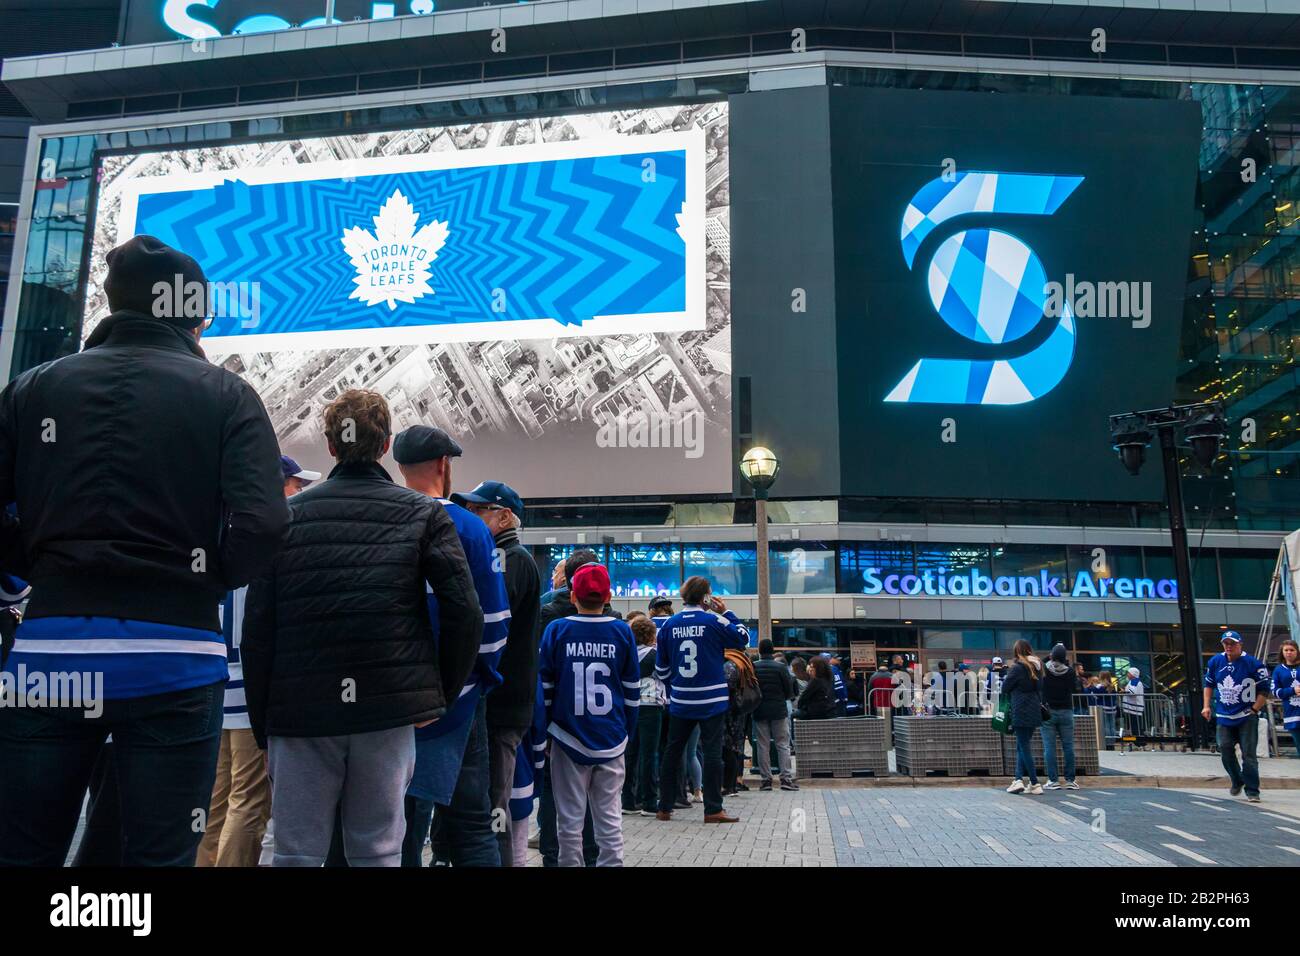 Inside Maple Leafs Square in-front of Scotiabank Arena on game day for the Toronto Maple Leafs as fans wait in line to enter the arena. Stock Photo